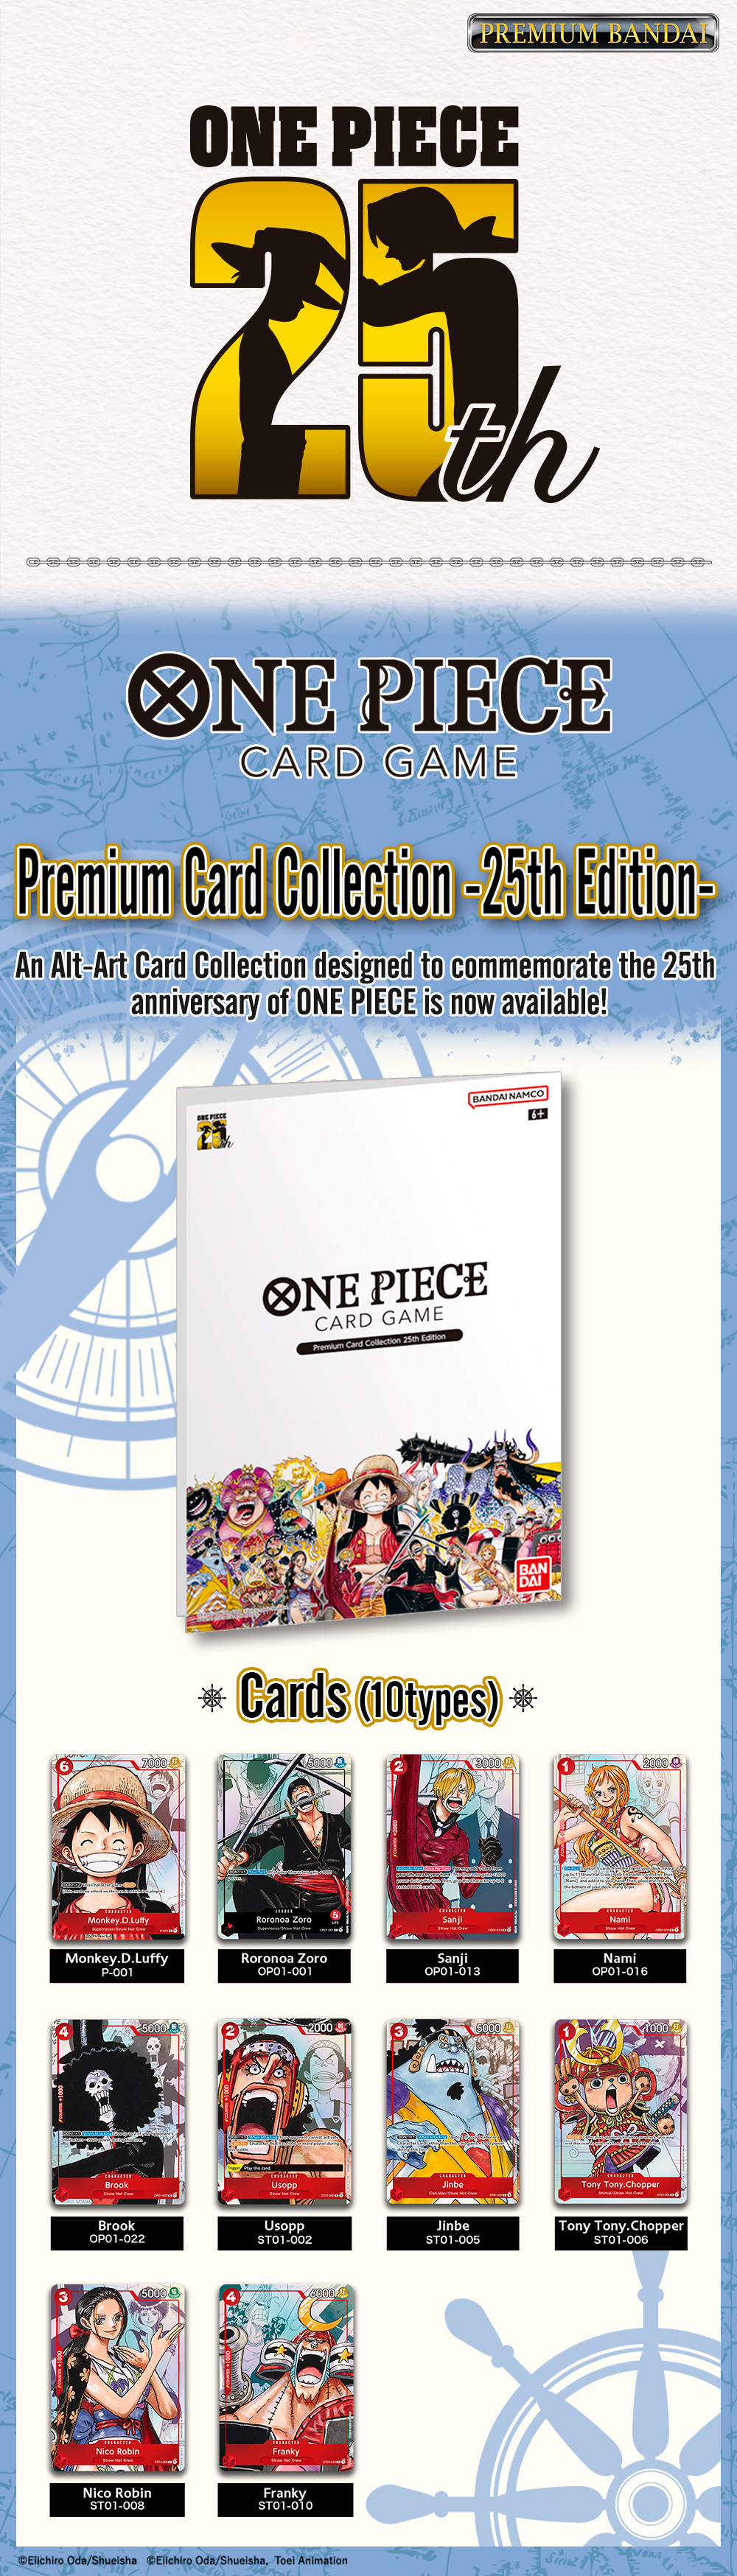 20221104_one_piece_card_game_pre_card_co